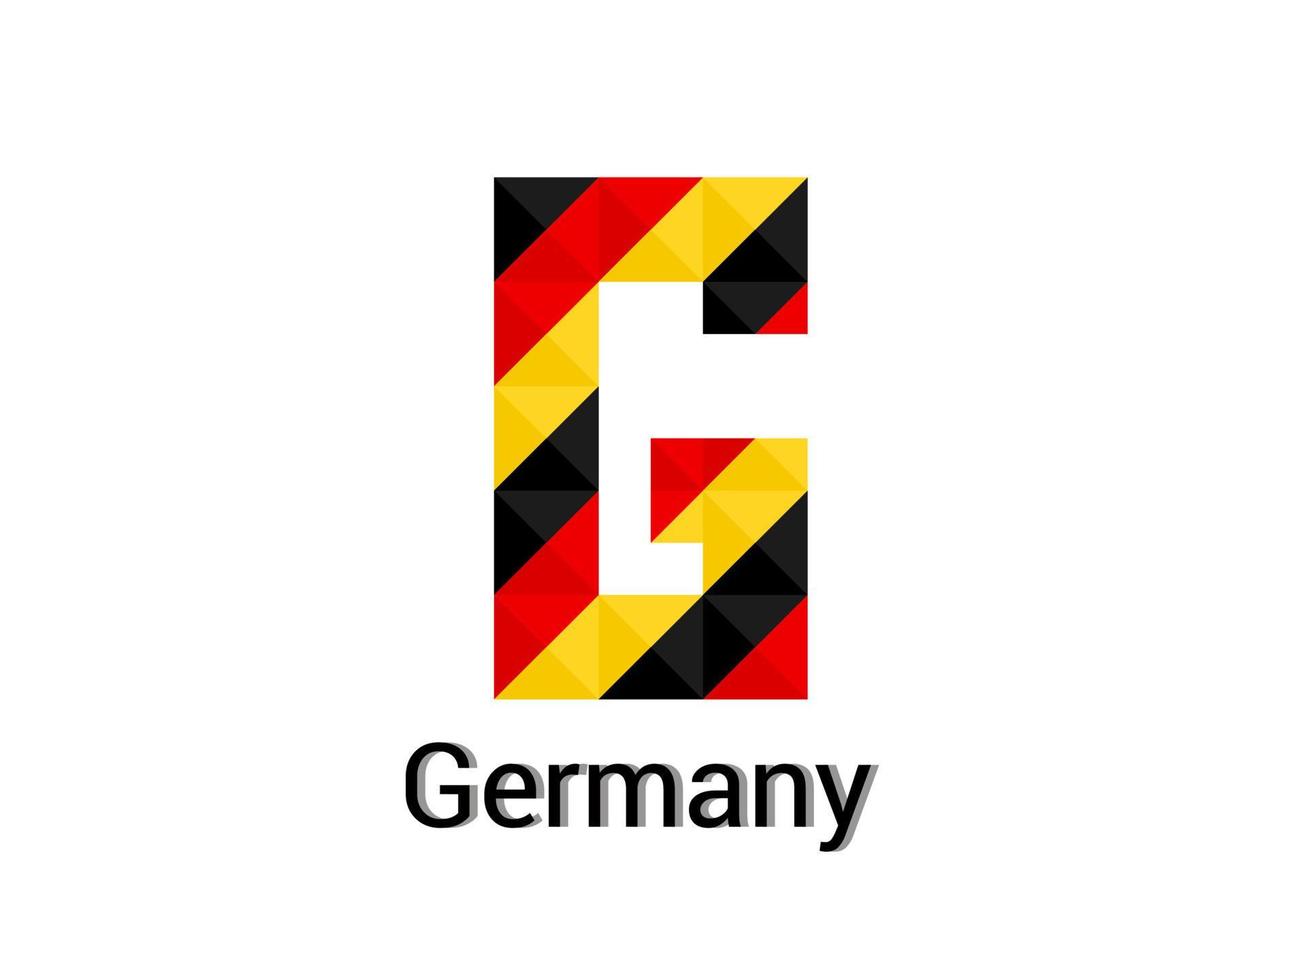 Creative Letter G with 3d germany colors concept. Good for print, t-shirt design, logo, etc. vector